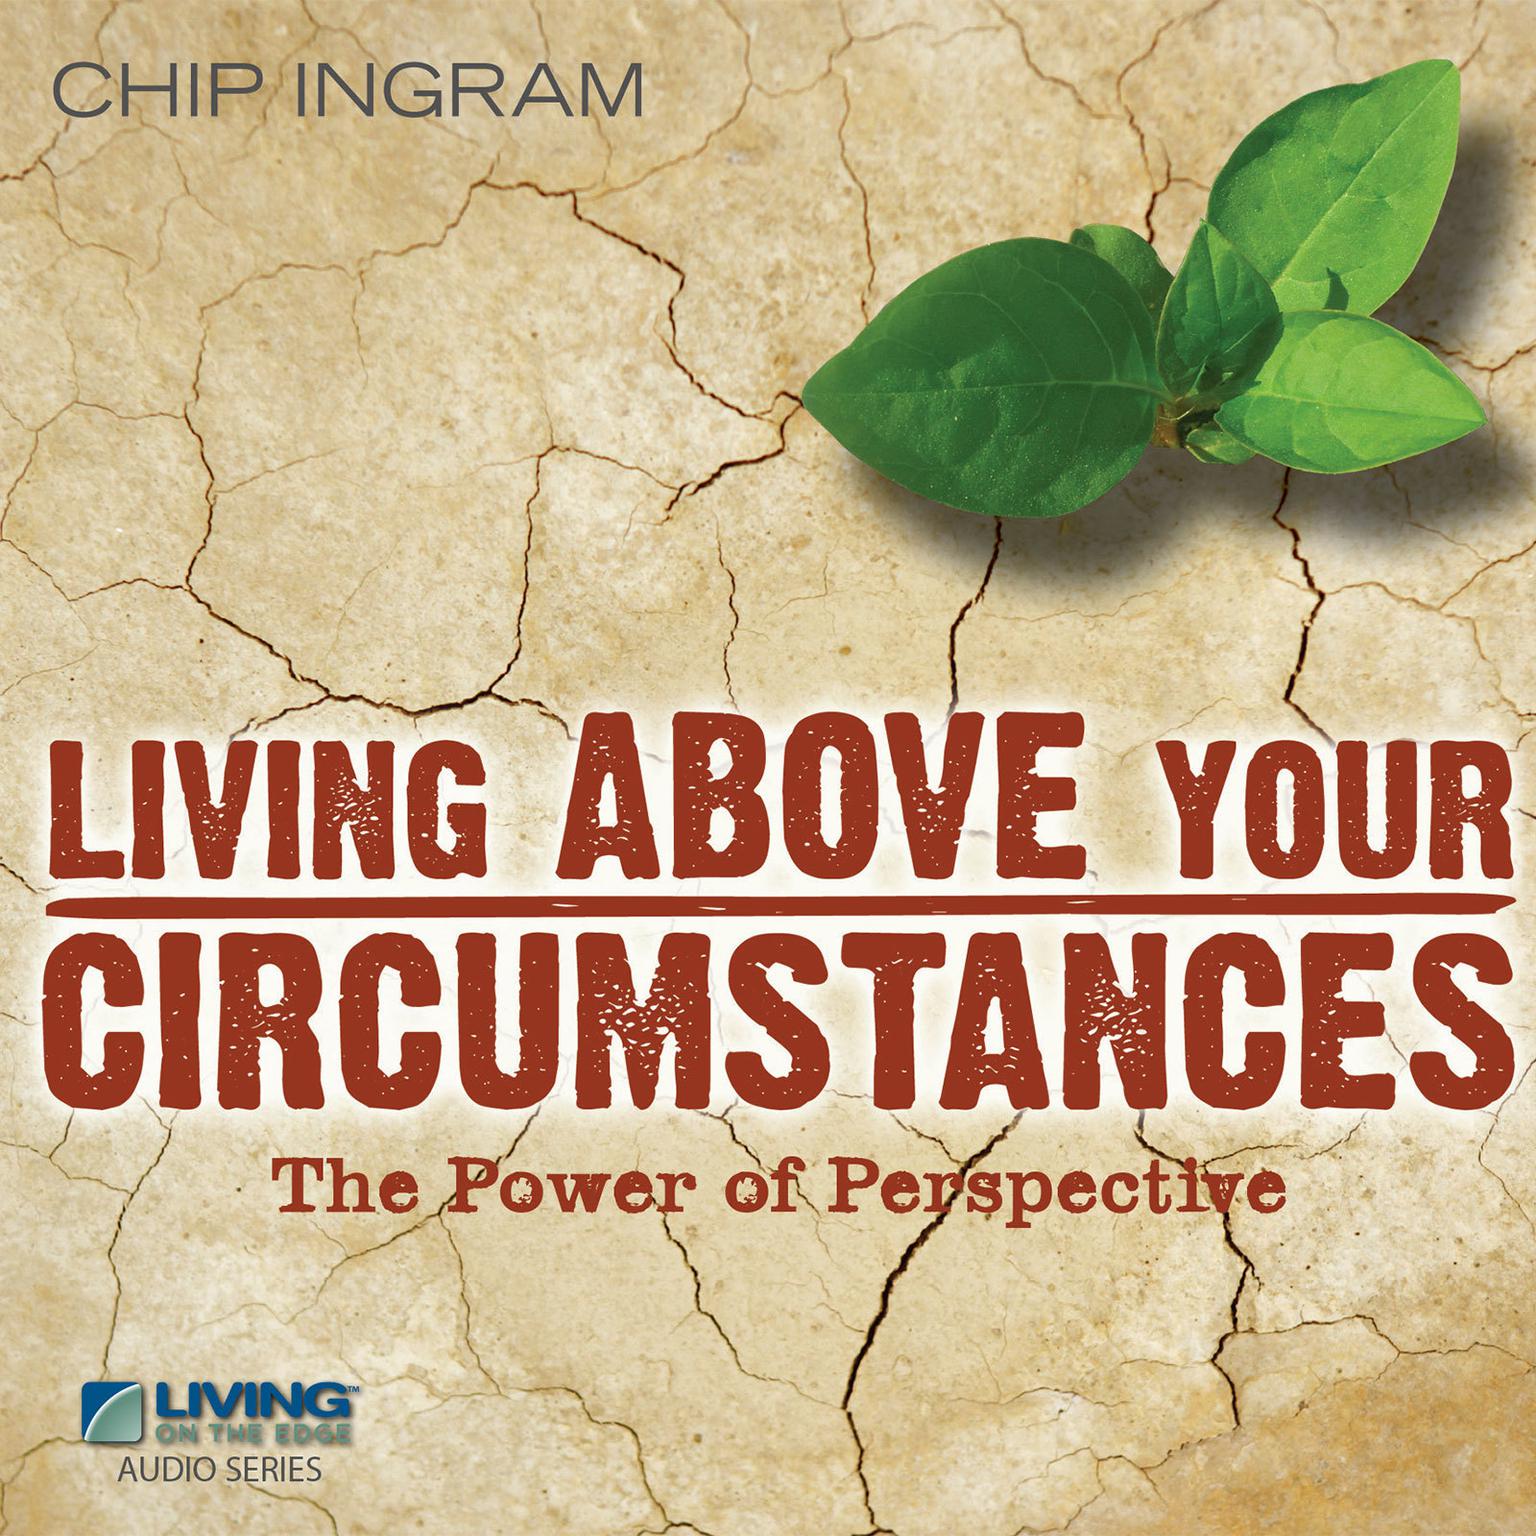 Living Above Your Circumstances: The Power of Perspective Audiobook, by Chip Ingram